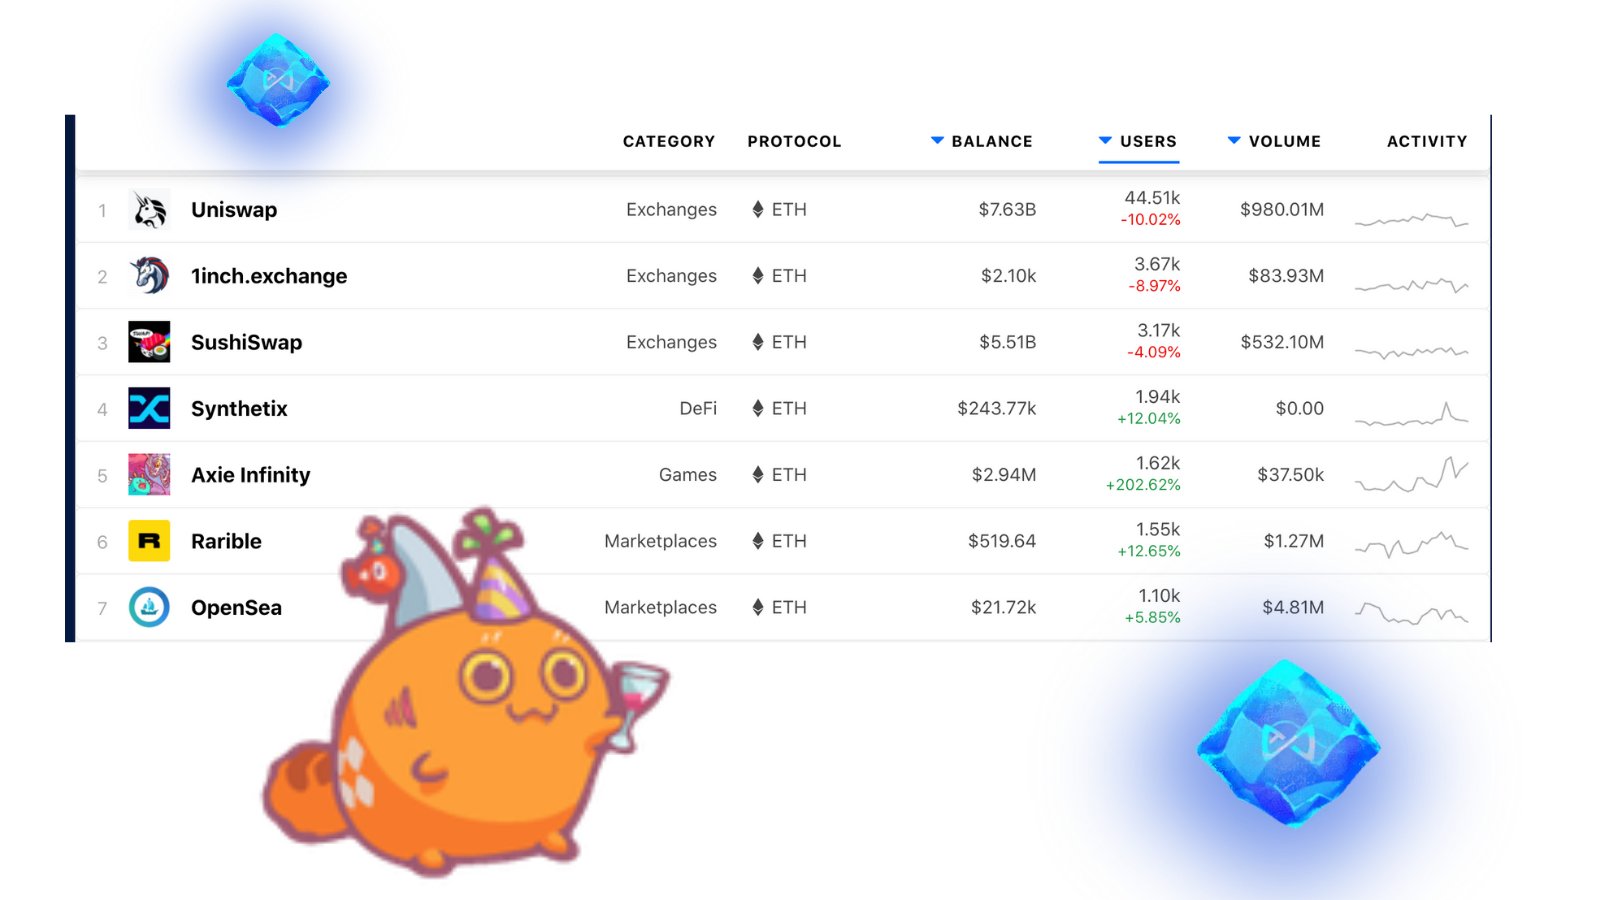 Axie Infinity On Twitter Up Here With Some Billion Dollar Protocols Let S See What Happens With Free Starter Axies Social Login Gas Free Play On Ronin